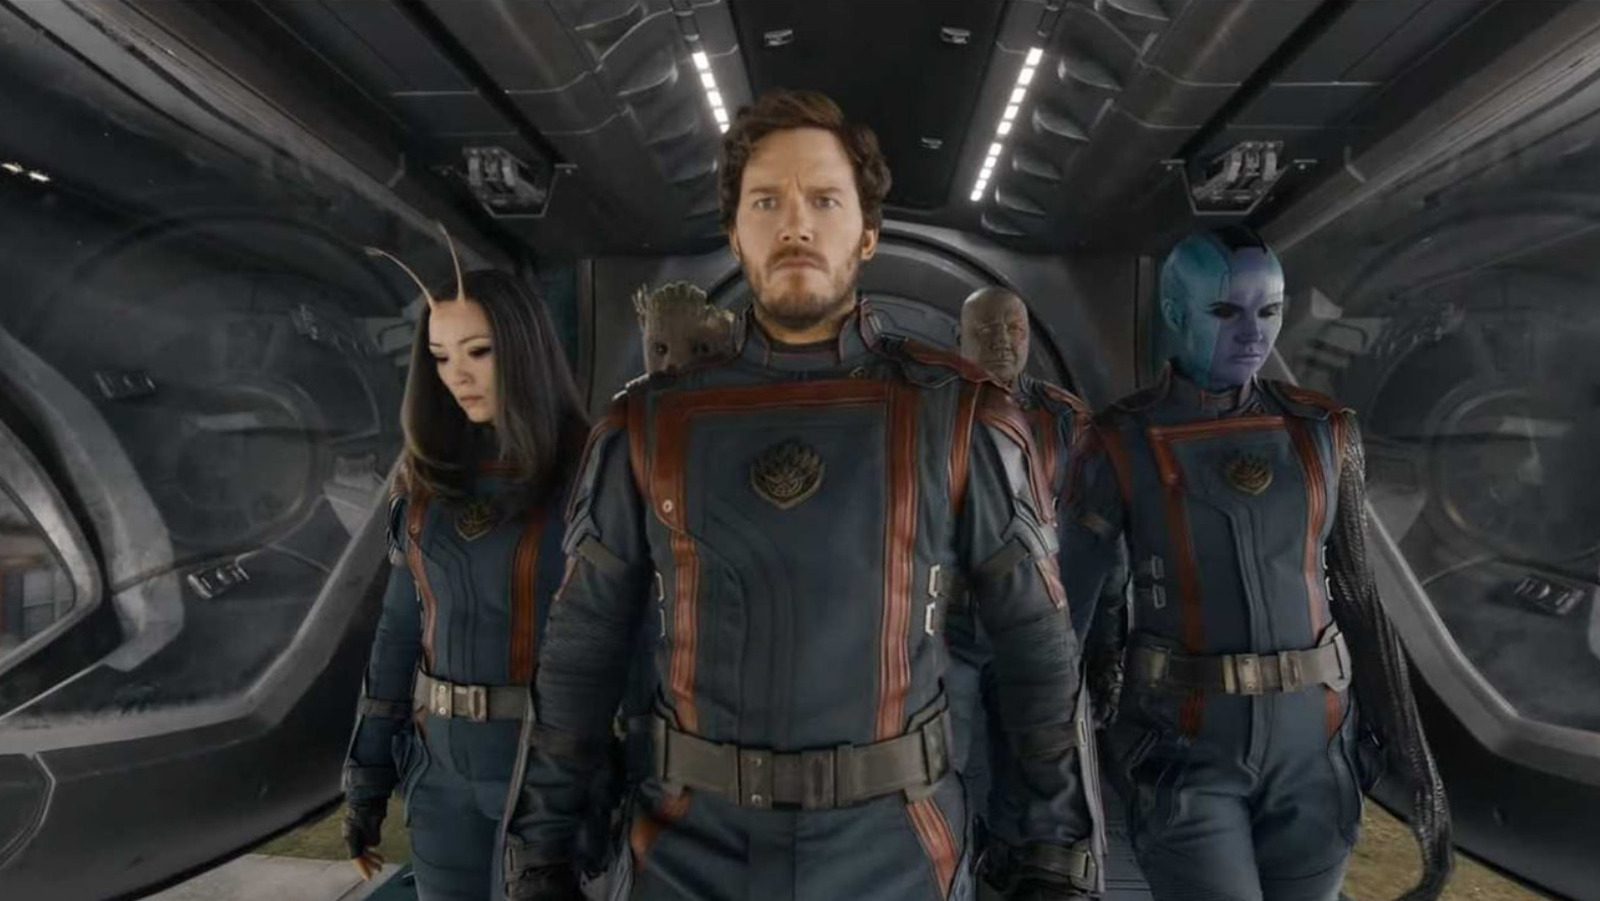 Chris Pratt on His Marvel Future After 'Guardians of the Galaxy